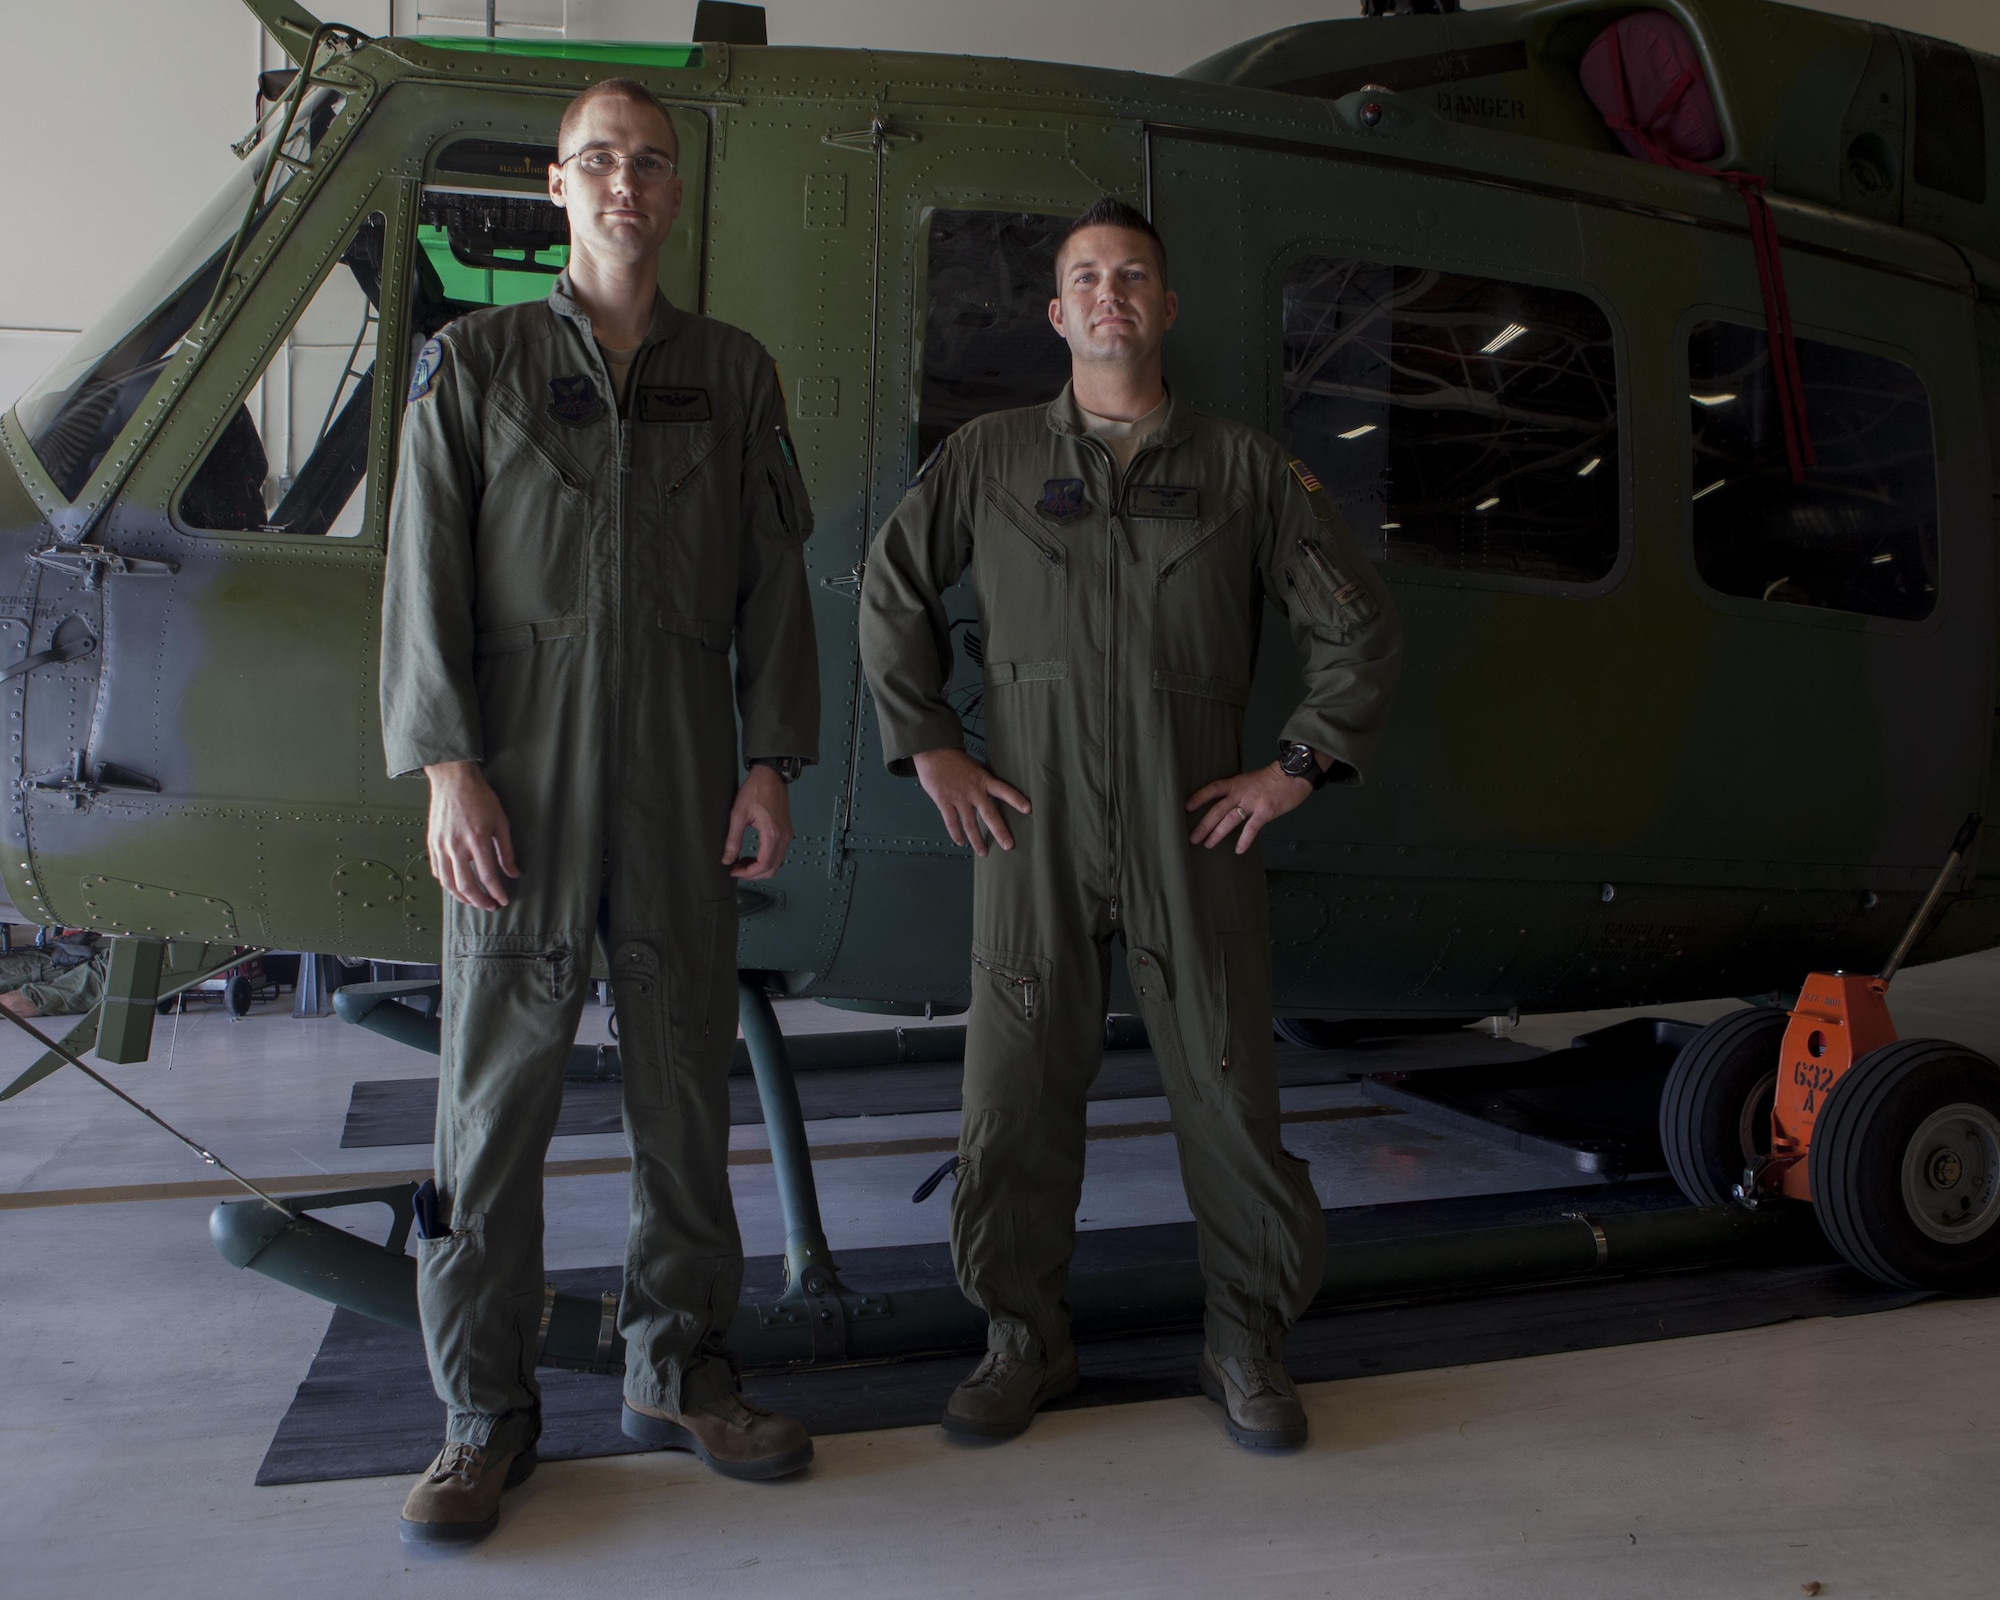 Capt. Stephen Jones, 37th Helicoptor Squadron command pilot and Staff Sgt. Brice Marshall, 37th HS flight engineer, pose with a UH-1N Huey helicopter on F.E. Warren Air Force Base, Wyo., Jan. 20, 2016. Jones and Marshall were part of a search and rescue mission that saved two lives on Jan. 18.   (U.S. Air Force photo by Lan Kim)